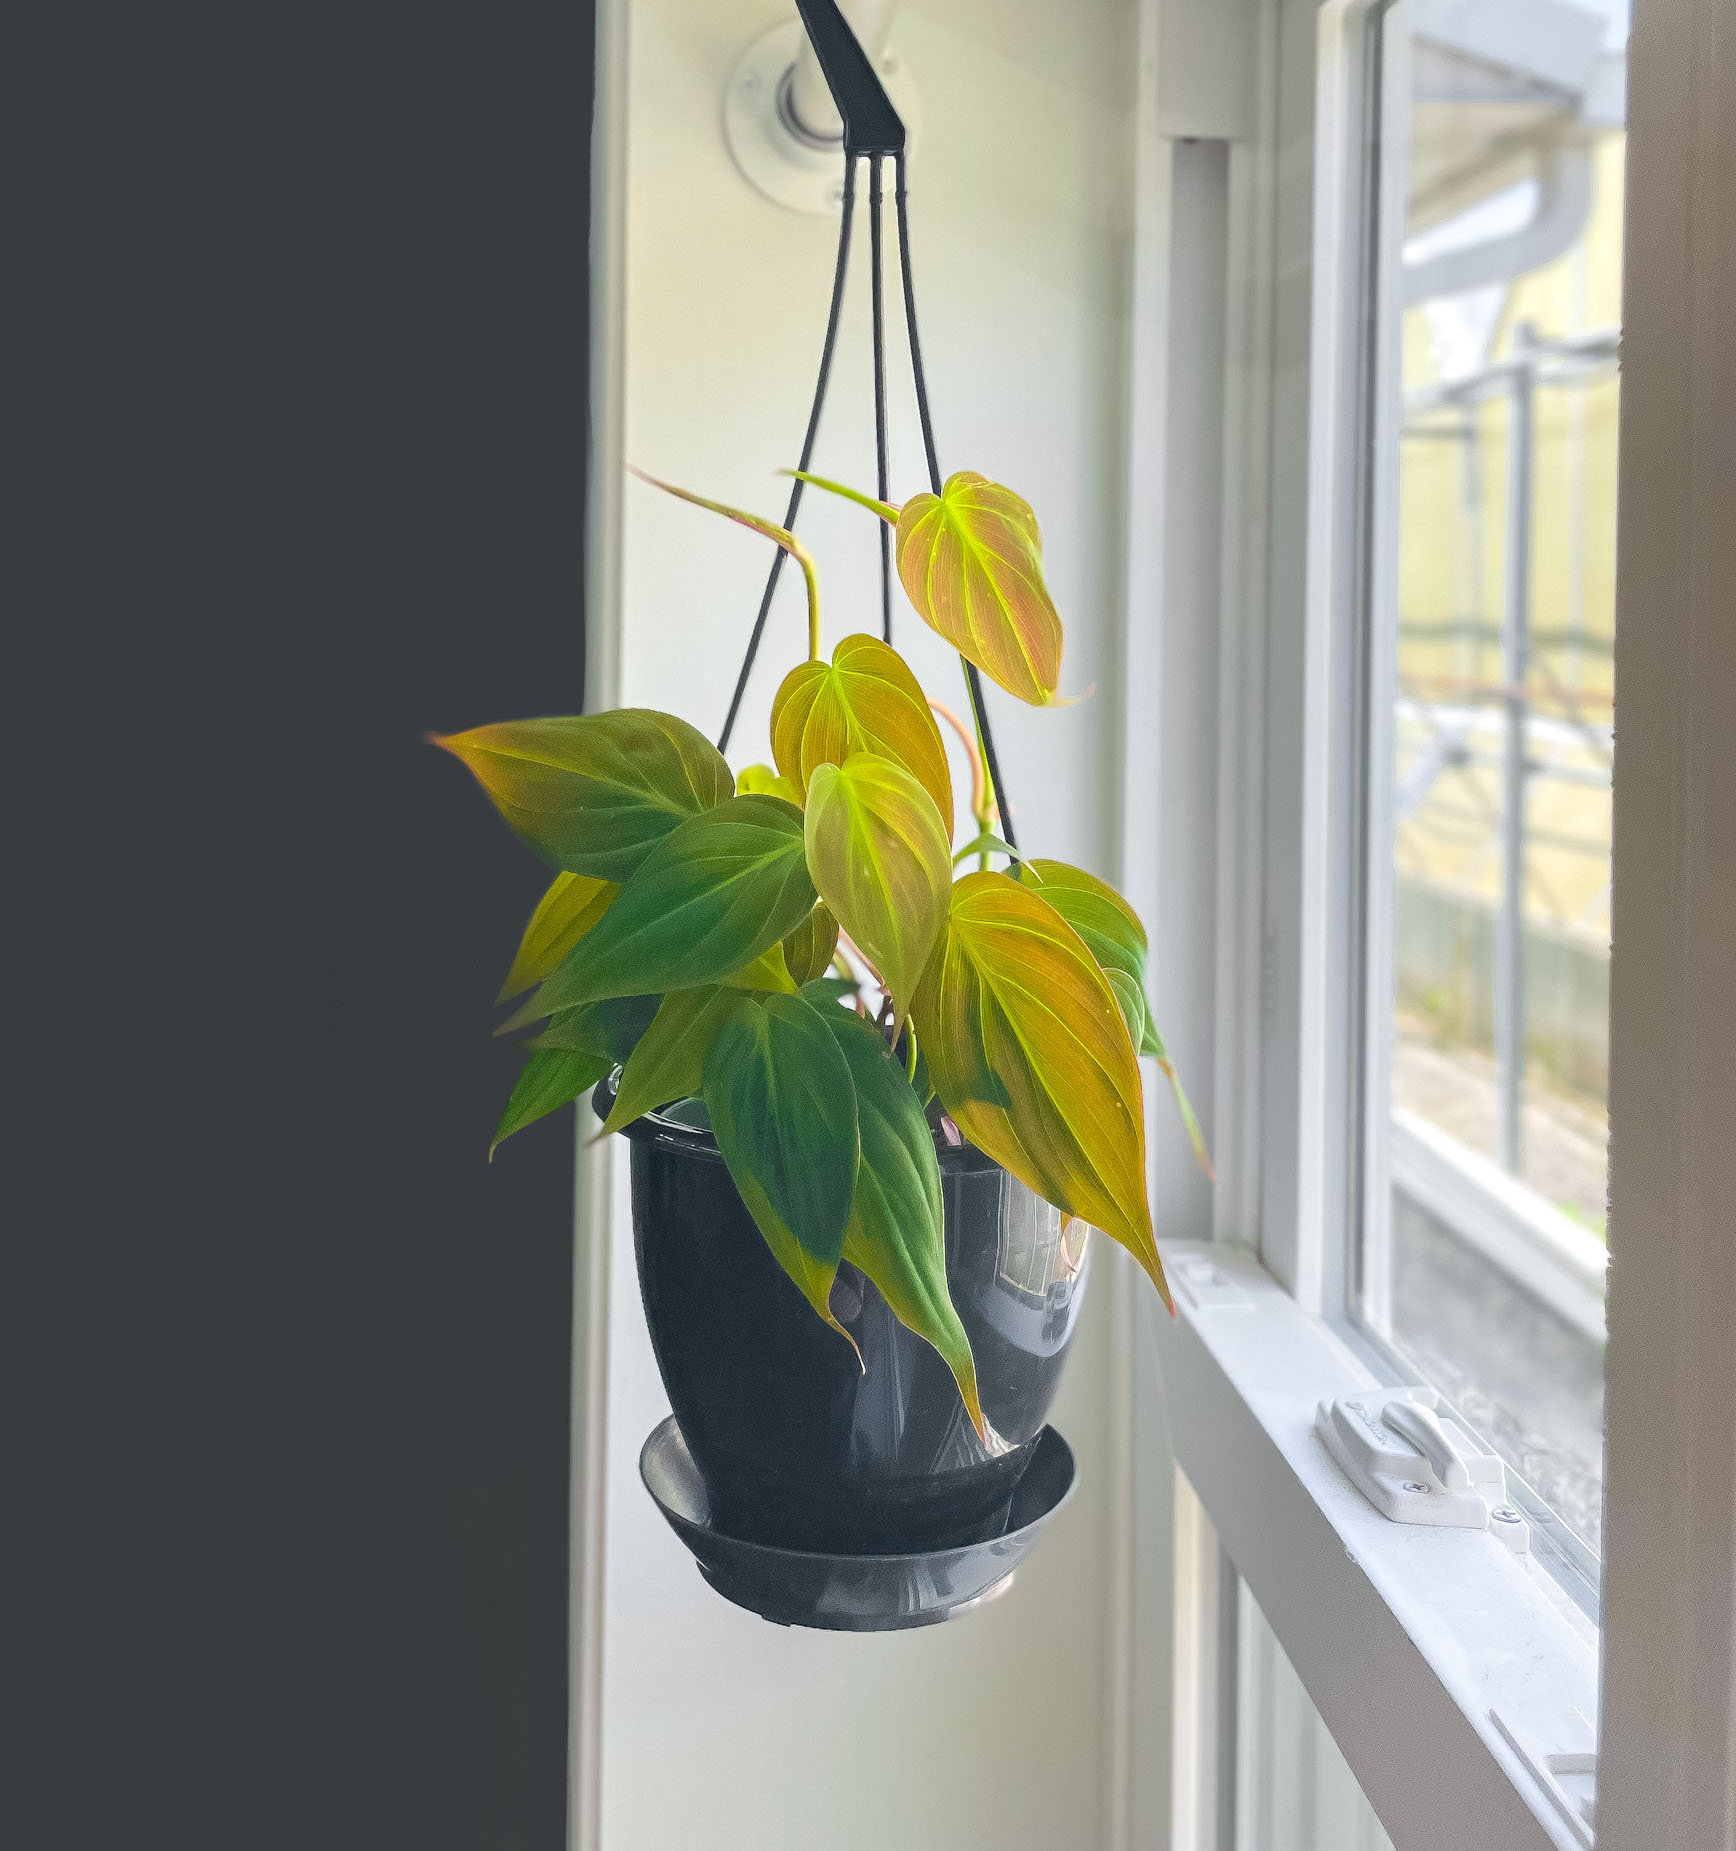 Wekiva Foliage Philodendron Micans Hanging Basket Live Plant in 4 in.  Hanging Pot Philodendron Micans Florist Quality Indoor 6L-6T7S-WBKA - The Home  Depot